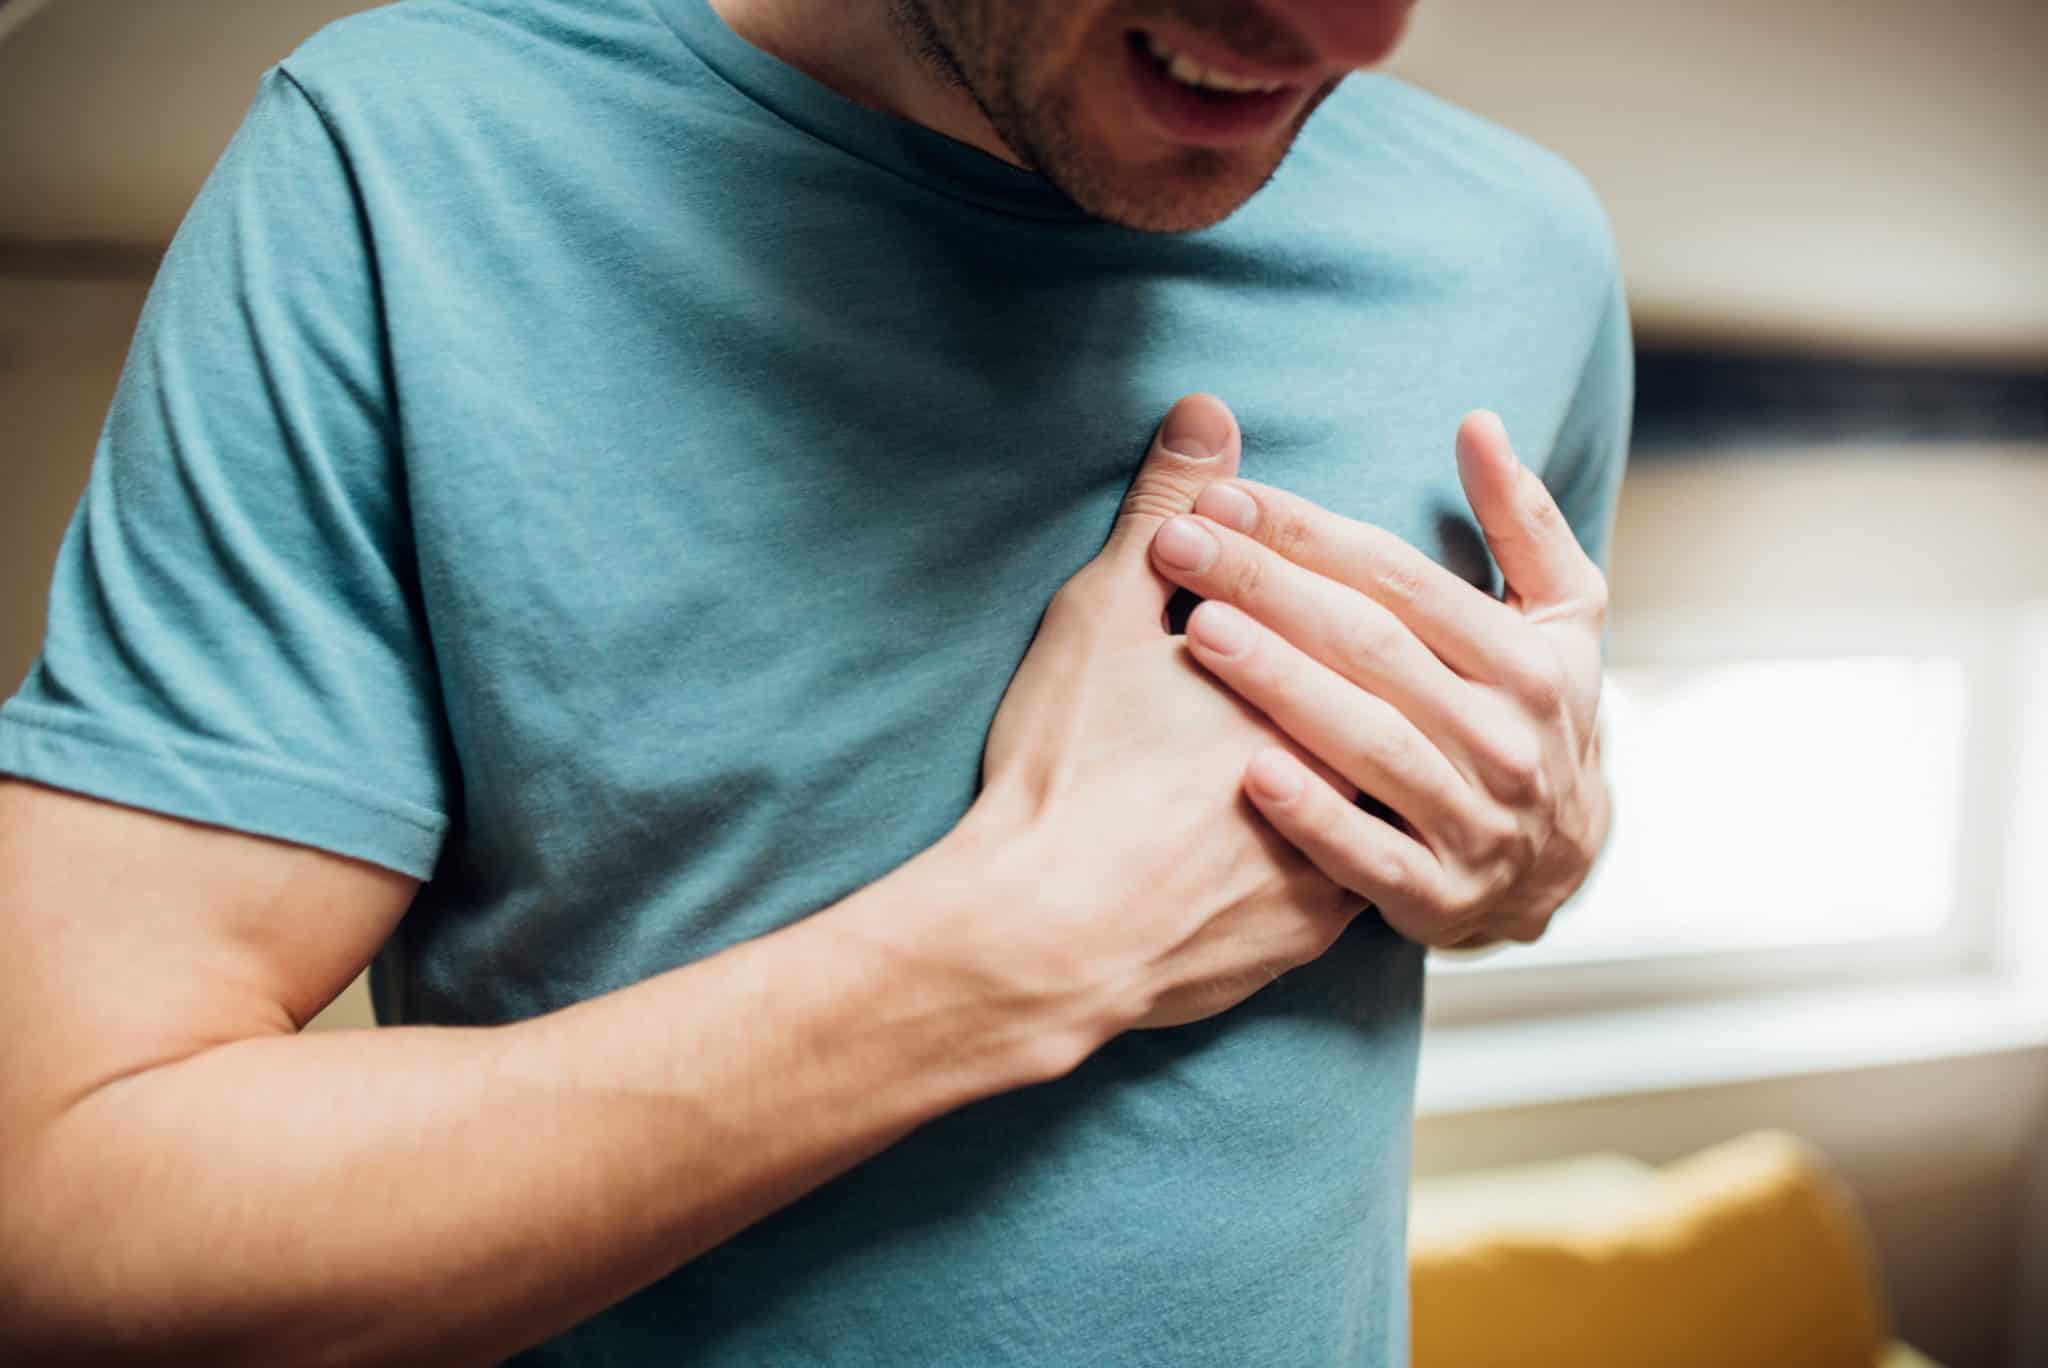 5 Simple Ways to Reduce the Risk of Heart Attacks